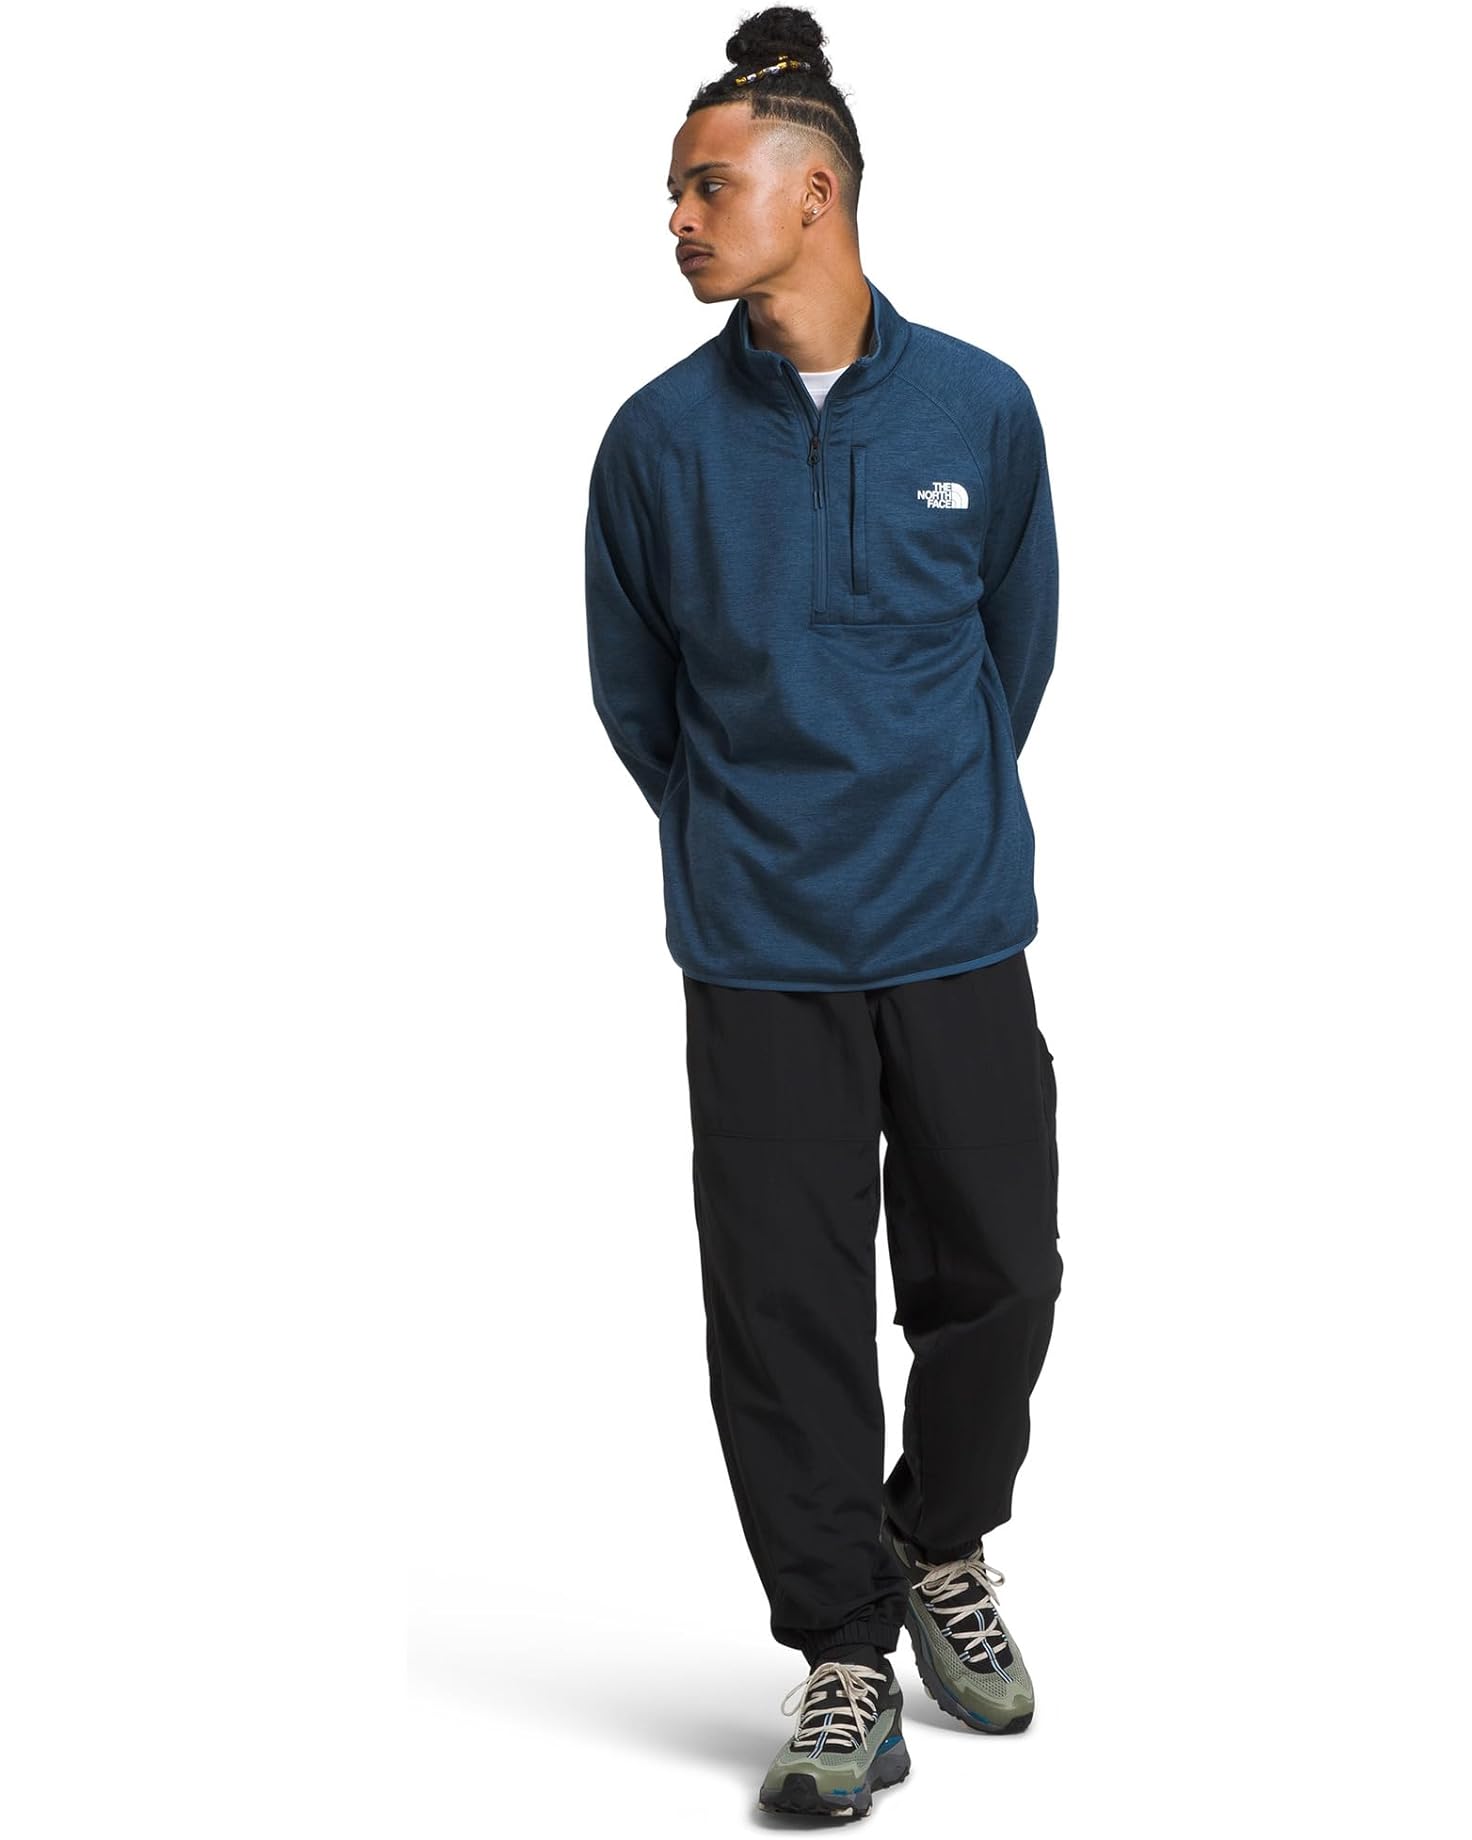 The North Face Men's Canyonlands 1/2 Zip Pullover (Shady Blue Heather) $42.24 + Free Shipping